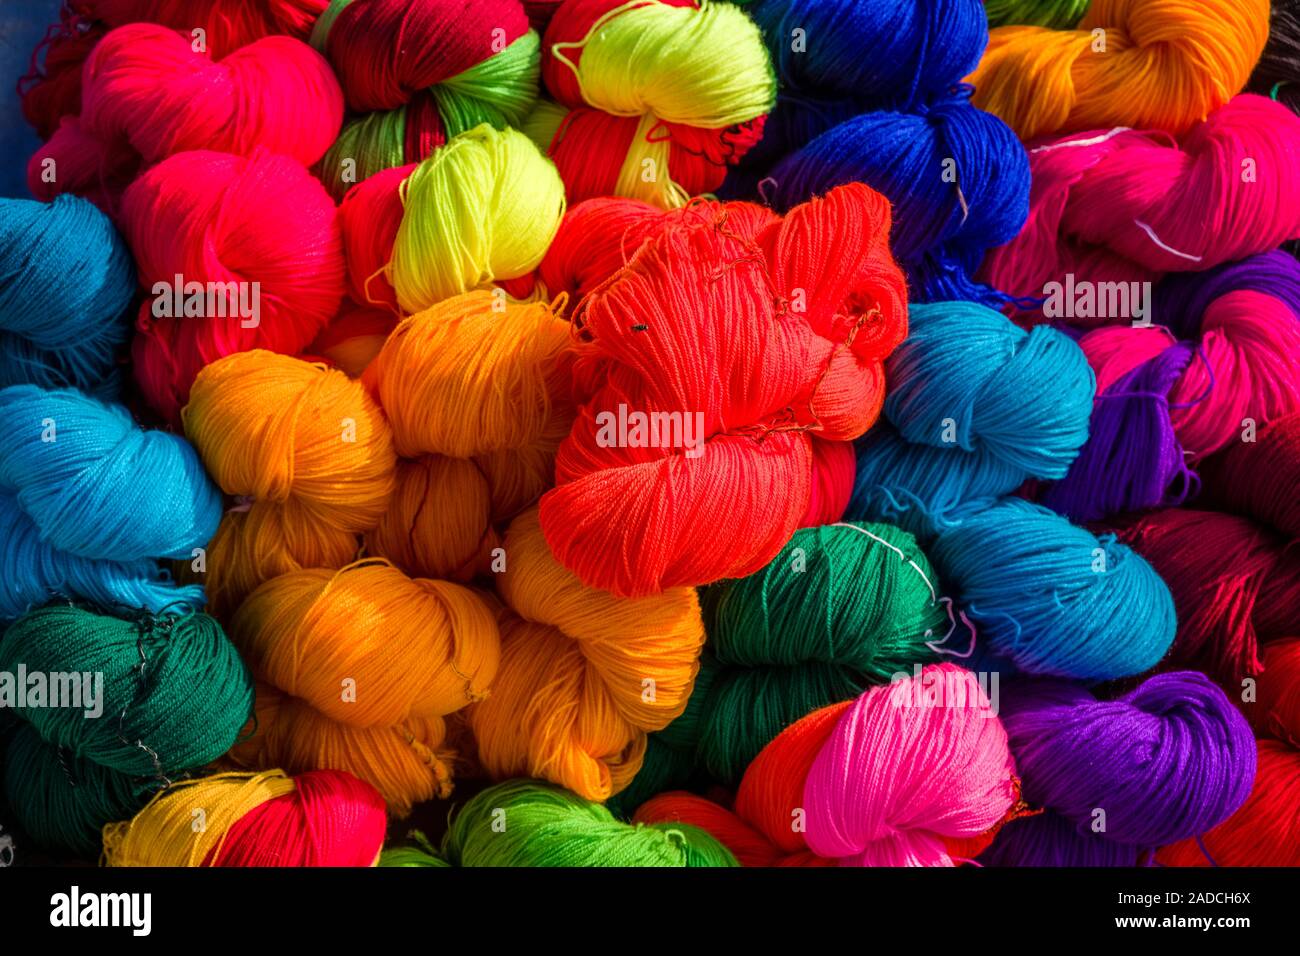 Balls of wool in different colors for sale at the weekly market Stock Photo